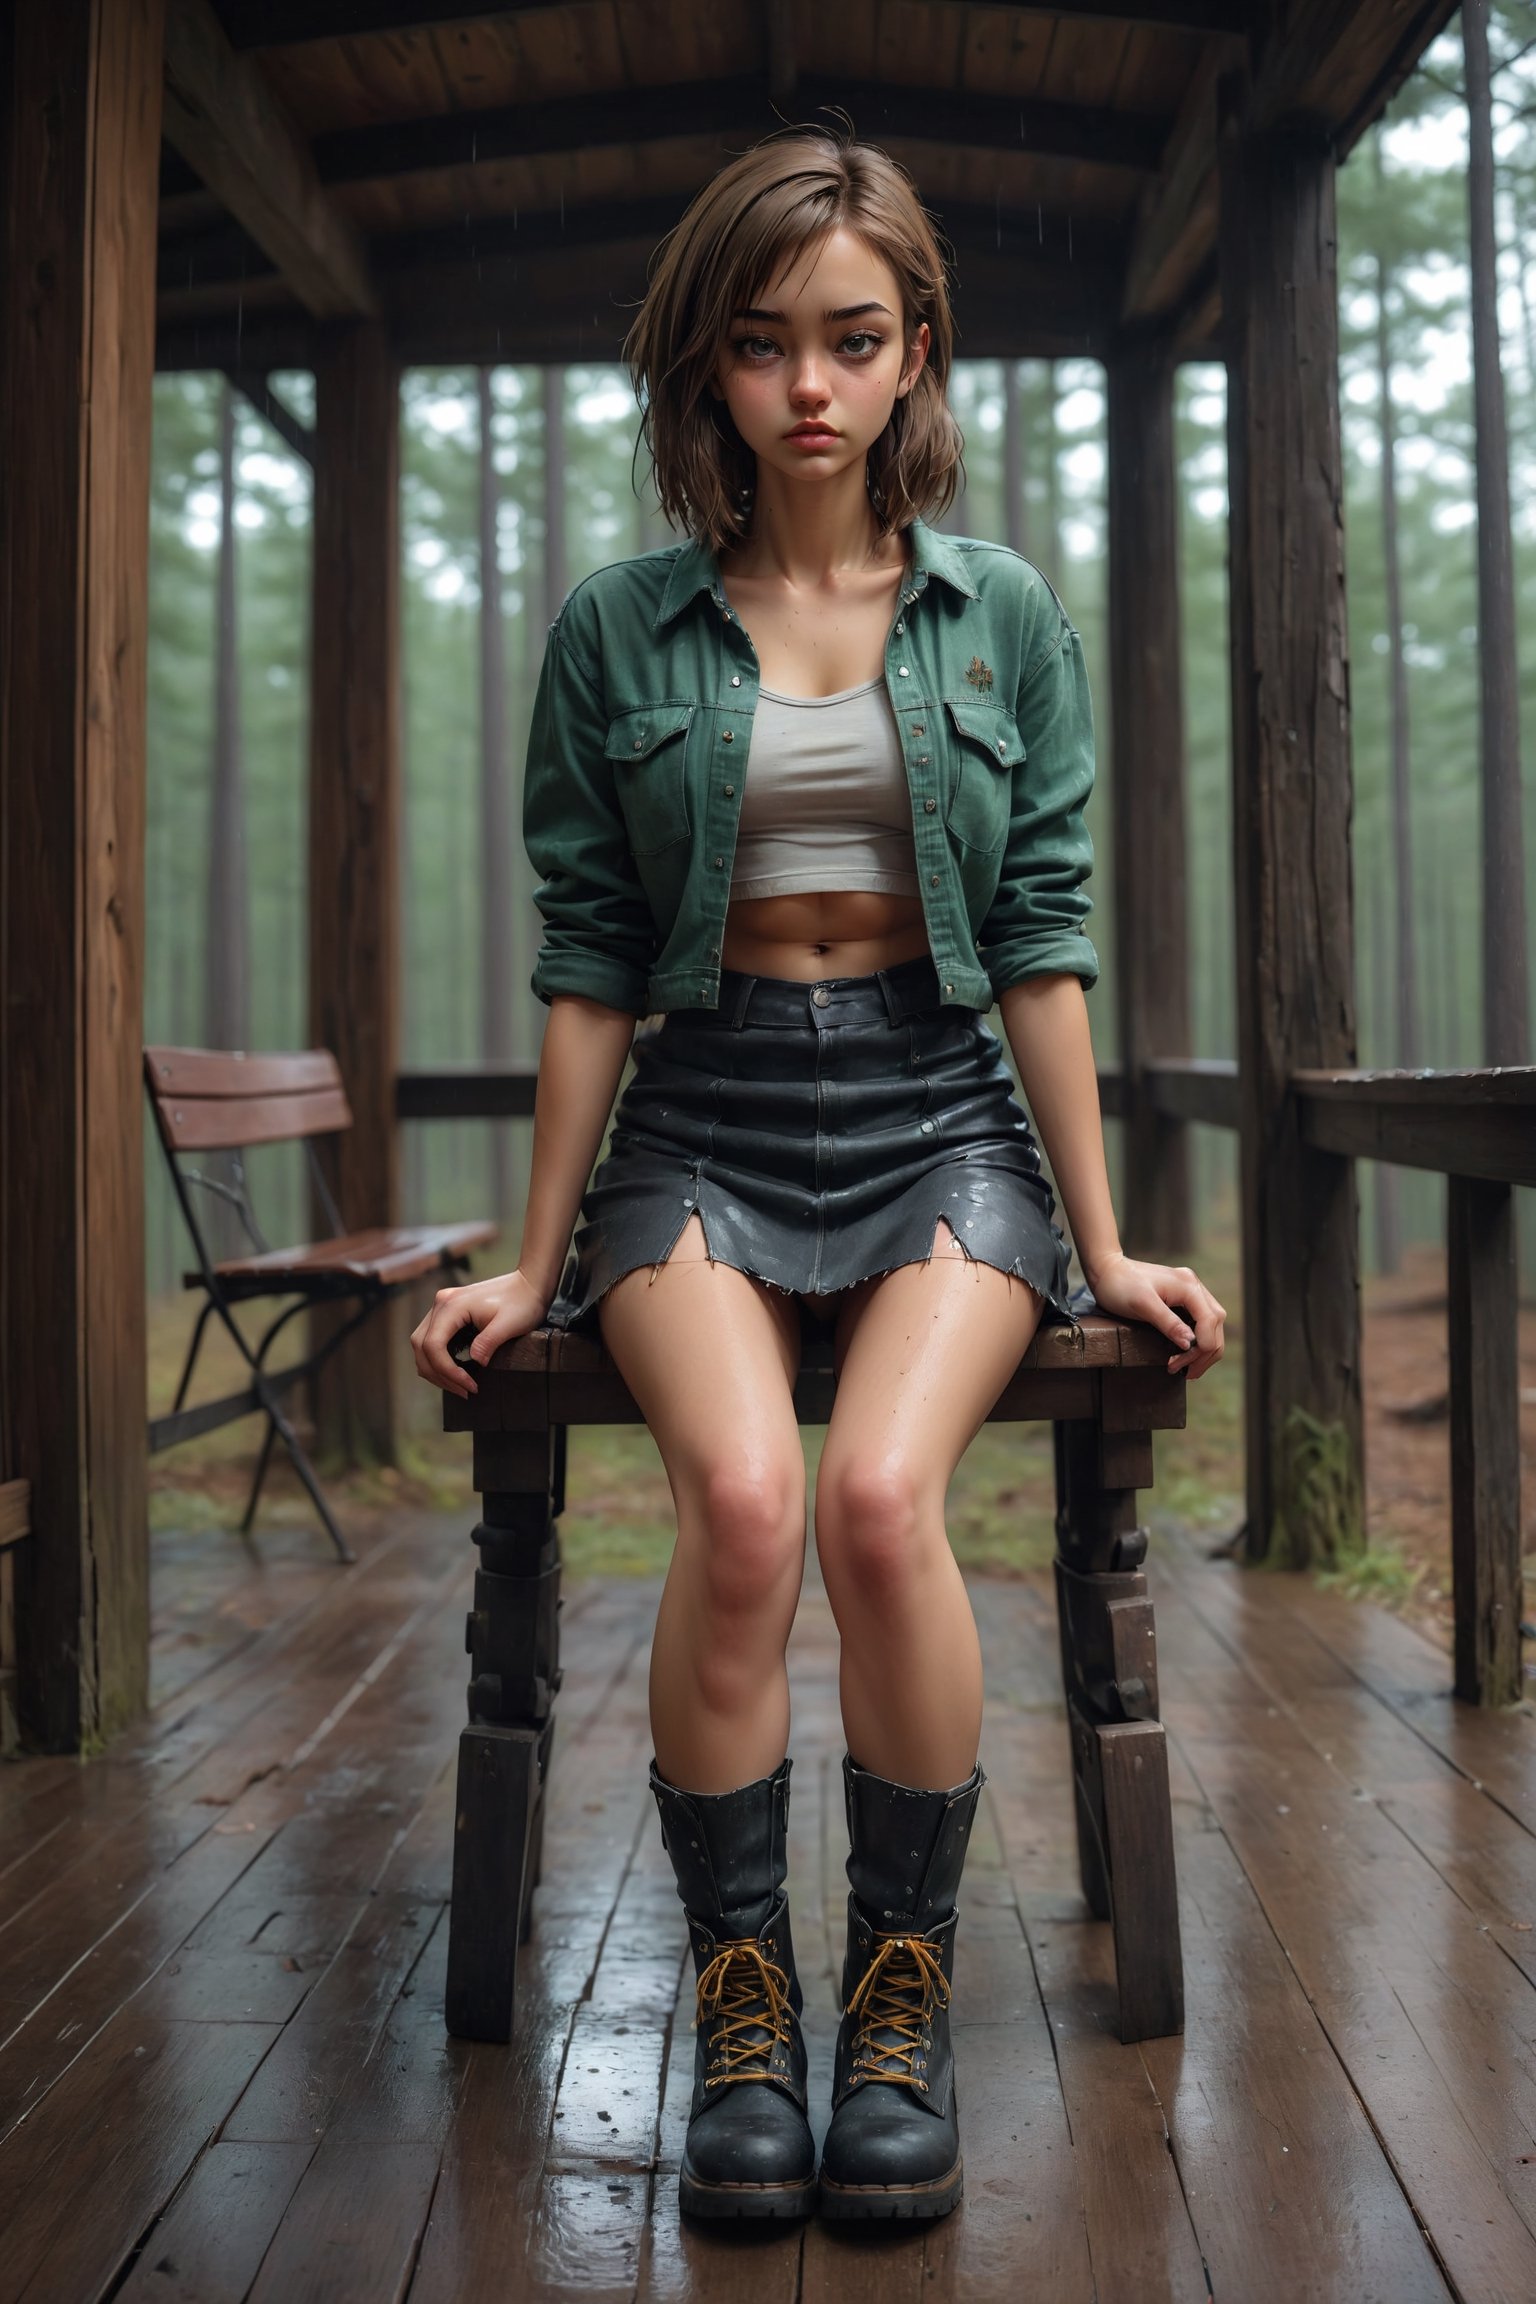 Professional photo of a spring pine forest in the rain, beautiful girl sitting on a wooden chair. wearing croptop lumberjack shirt and low hung ultra short micro miniskirt, long slender legs, combat boots, View from an old dark (porch:1.2), path, overhang. Contrast, detailed, hires, UHD, 8K, aesthetic portrait